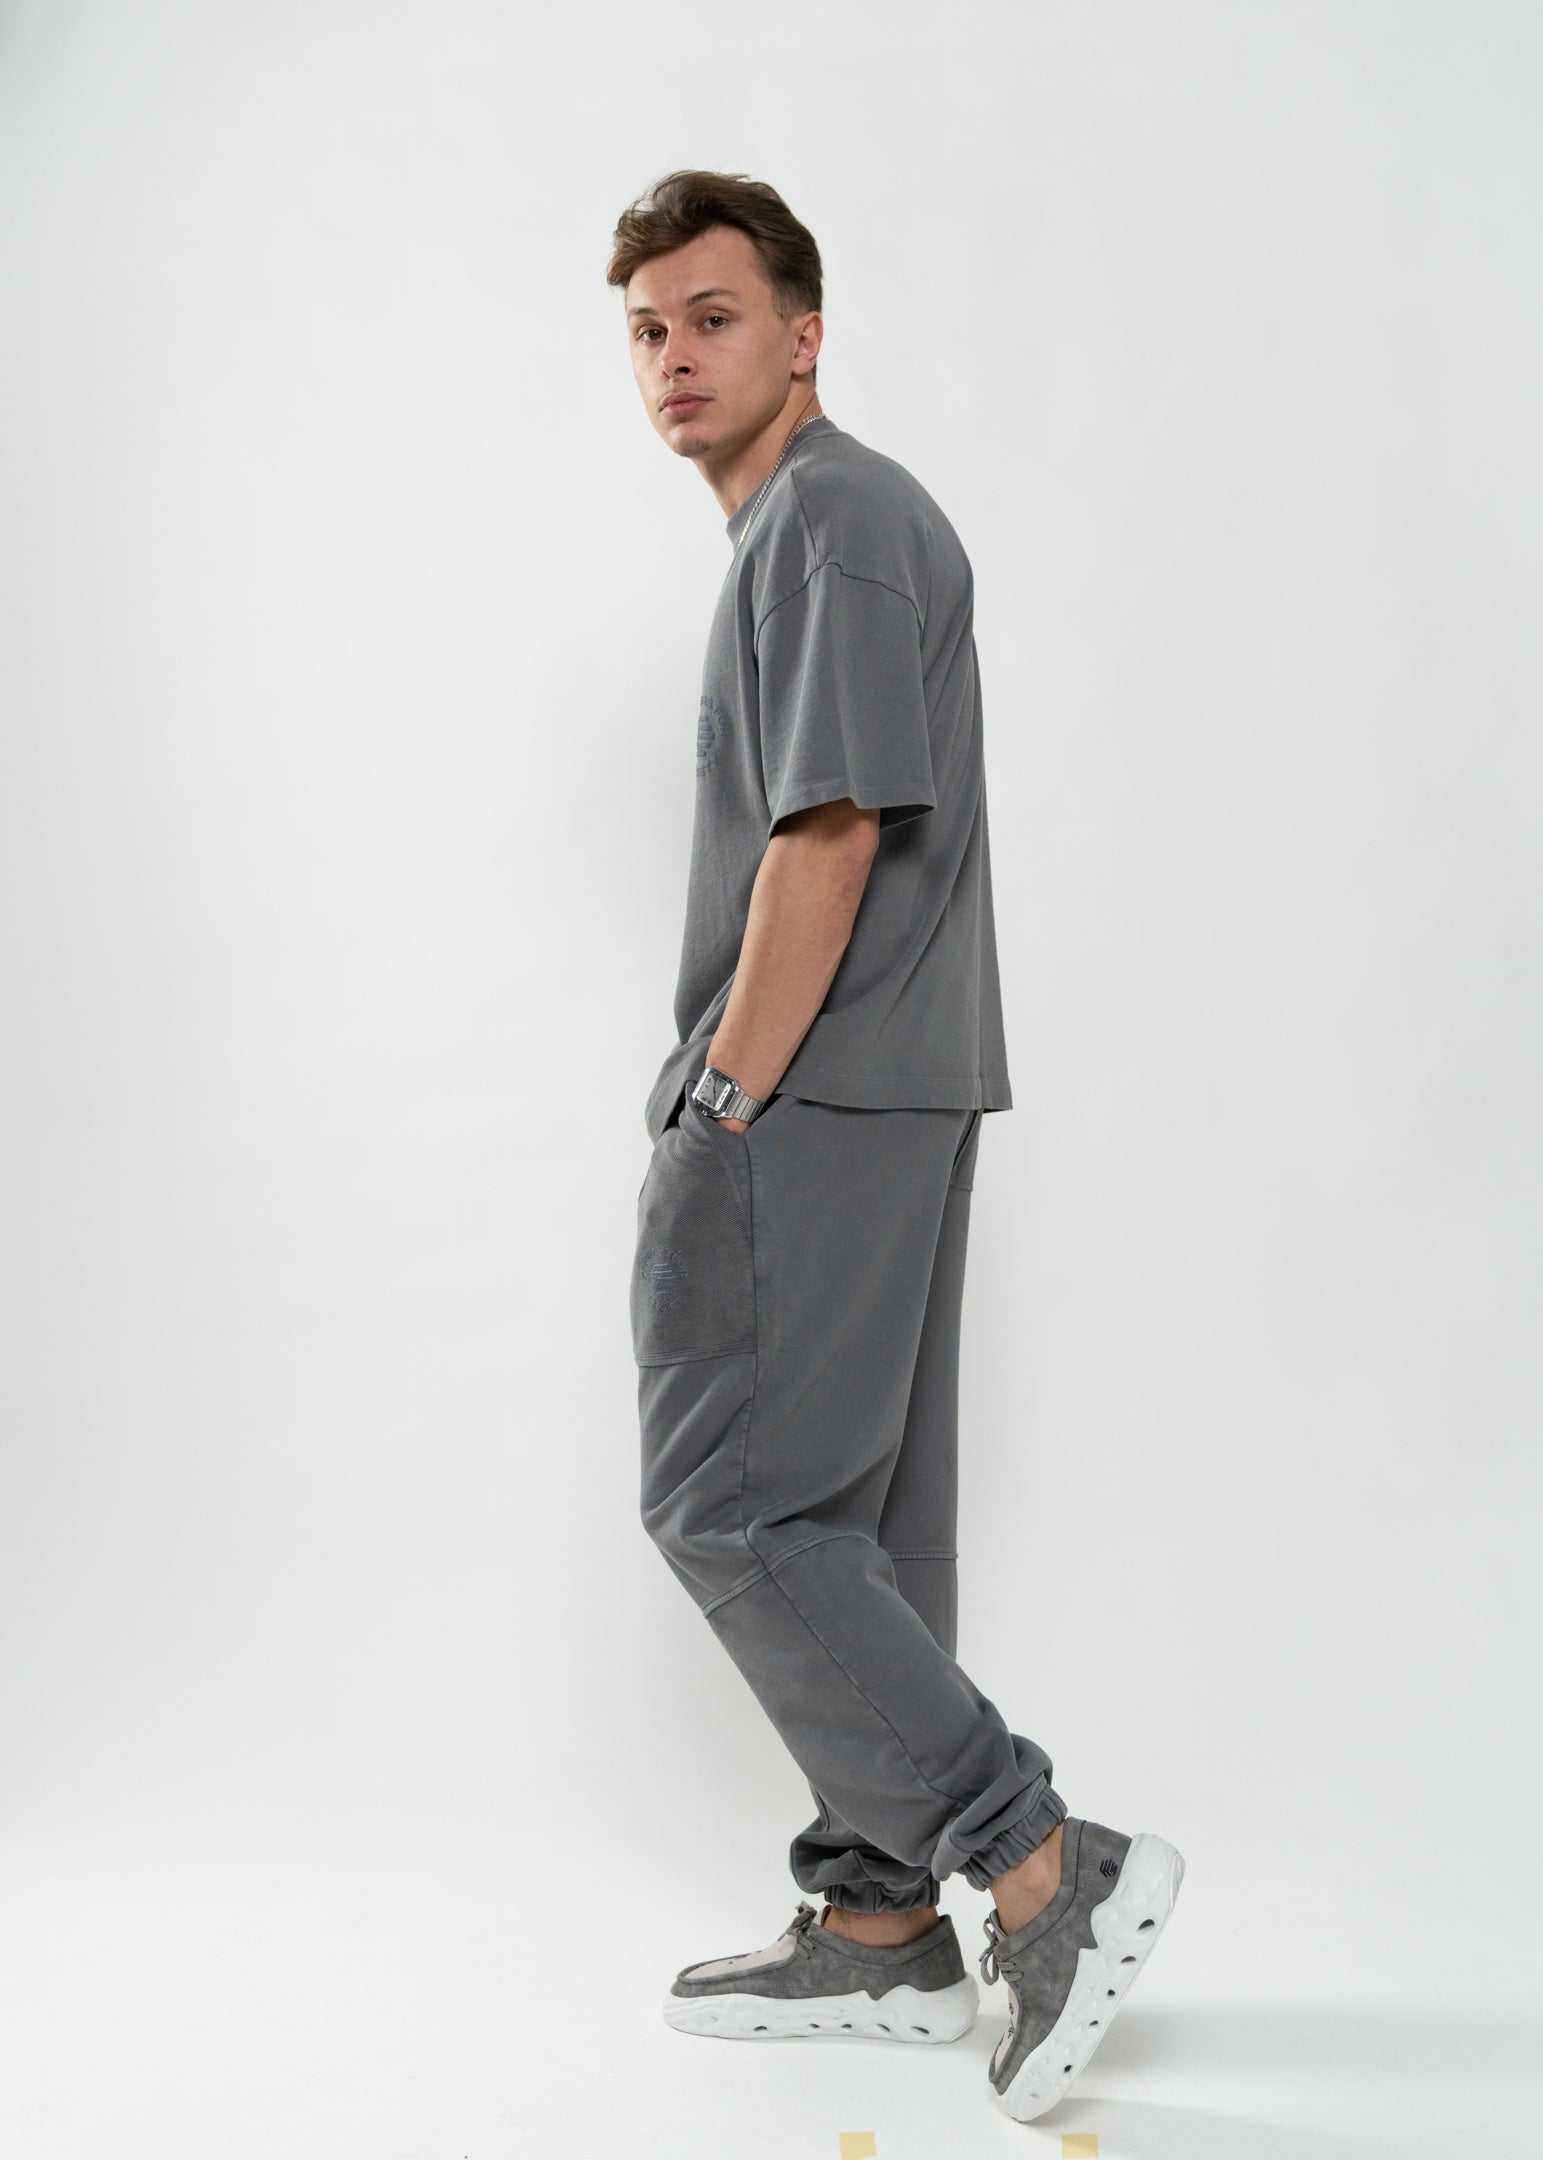 Flowers for Society Basic Jogger pant washed grey lateral view worn by model Ben standing